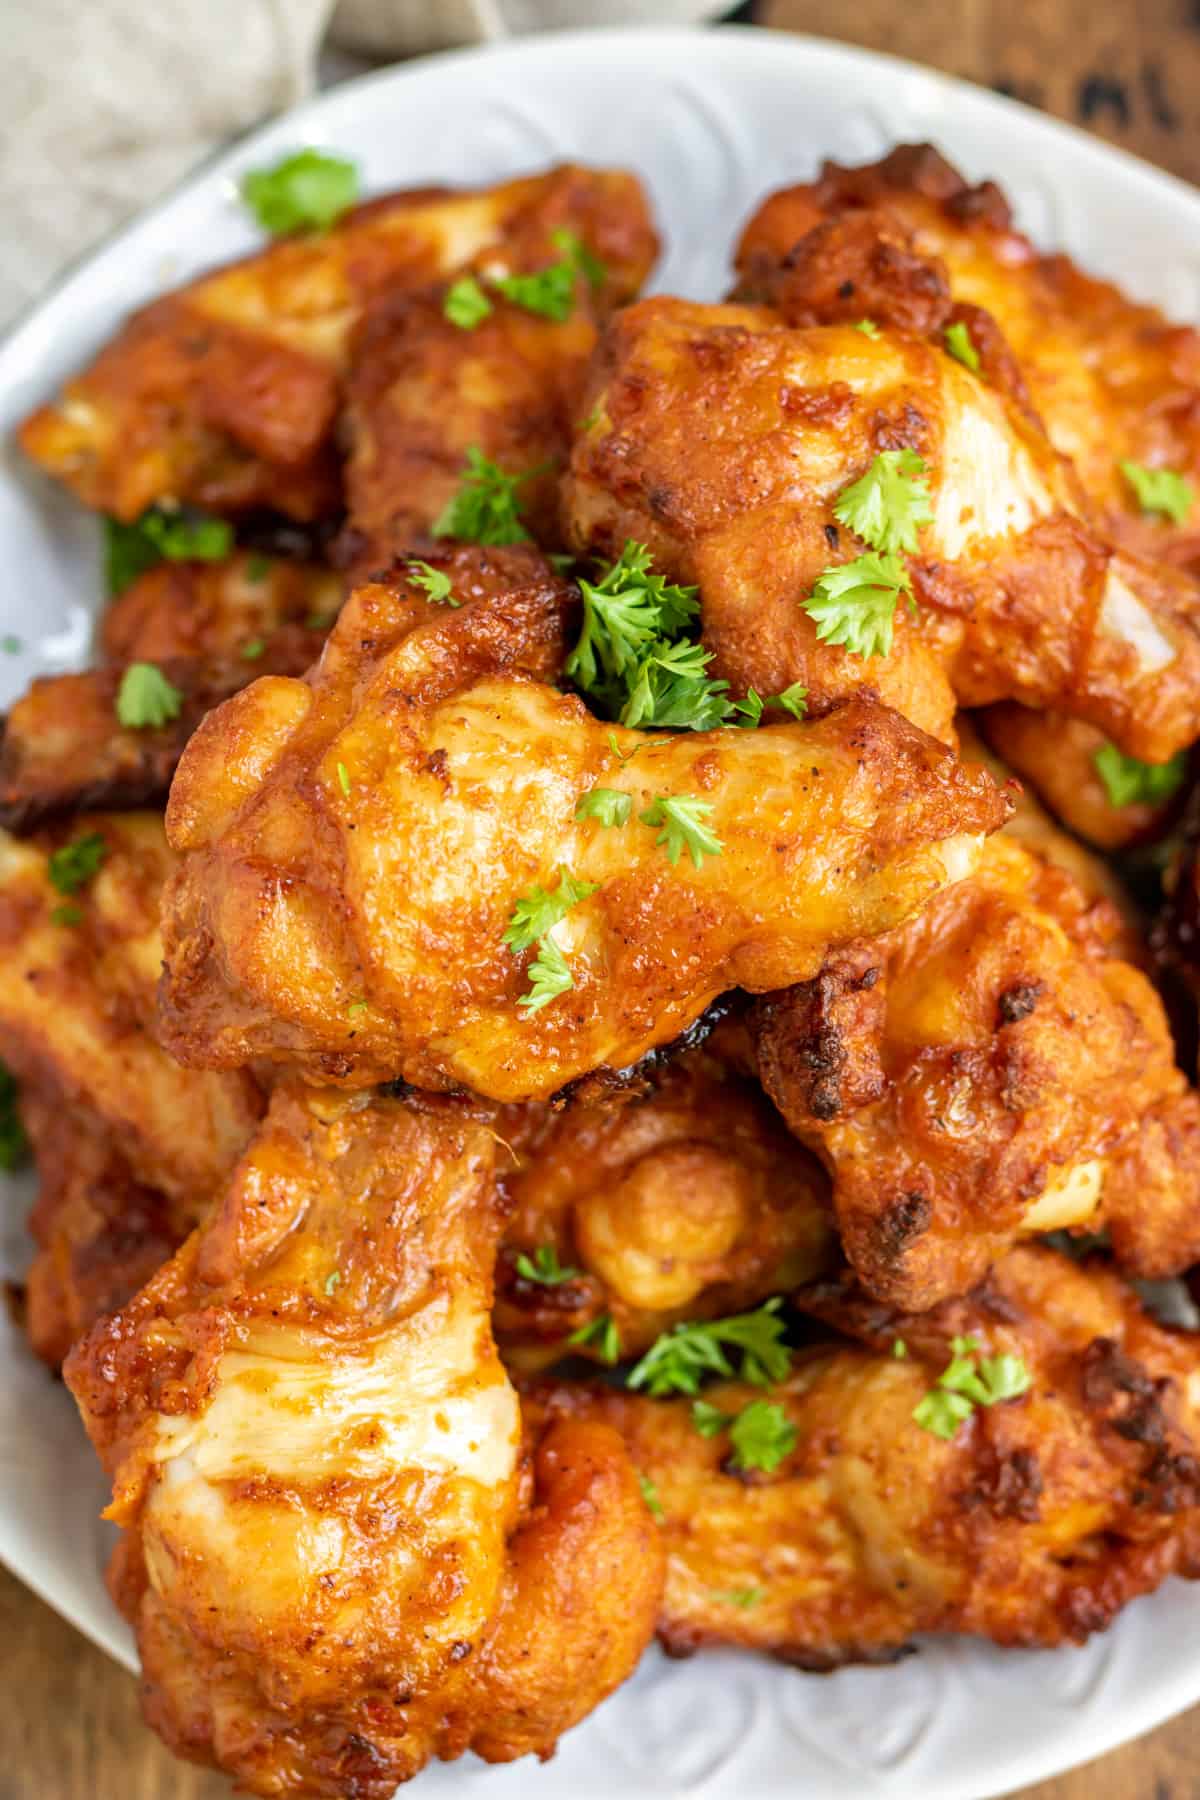 A pile of baked cajun wings on a plate.